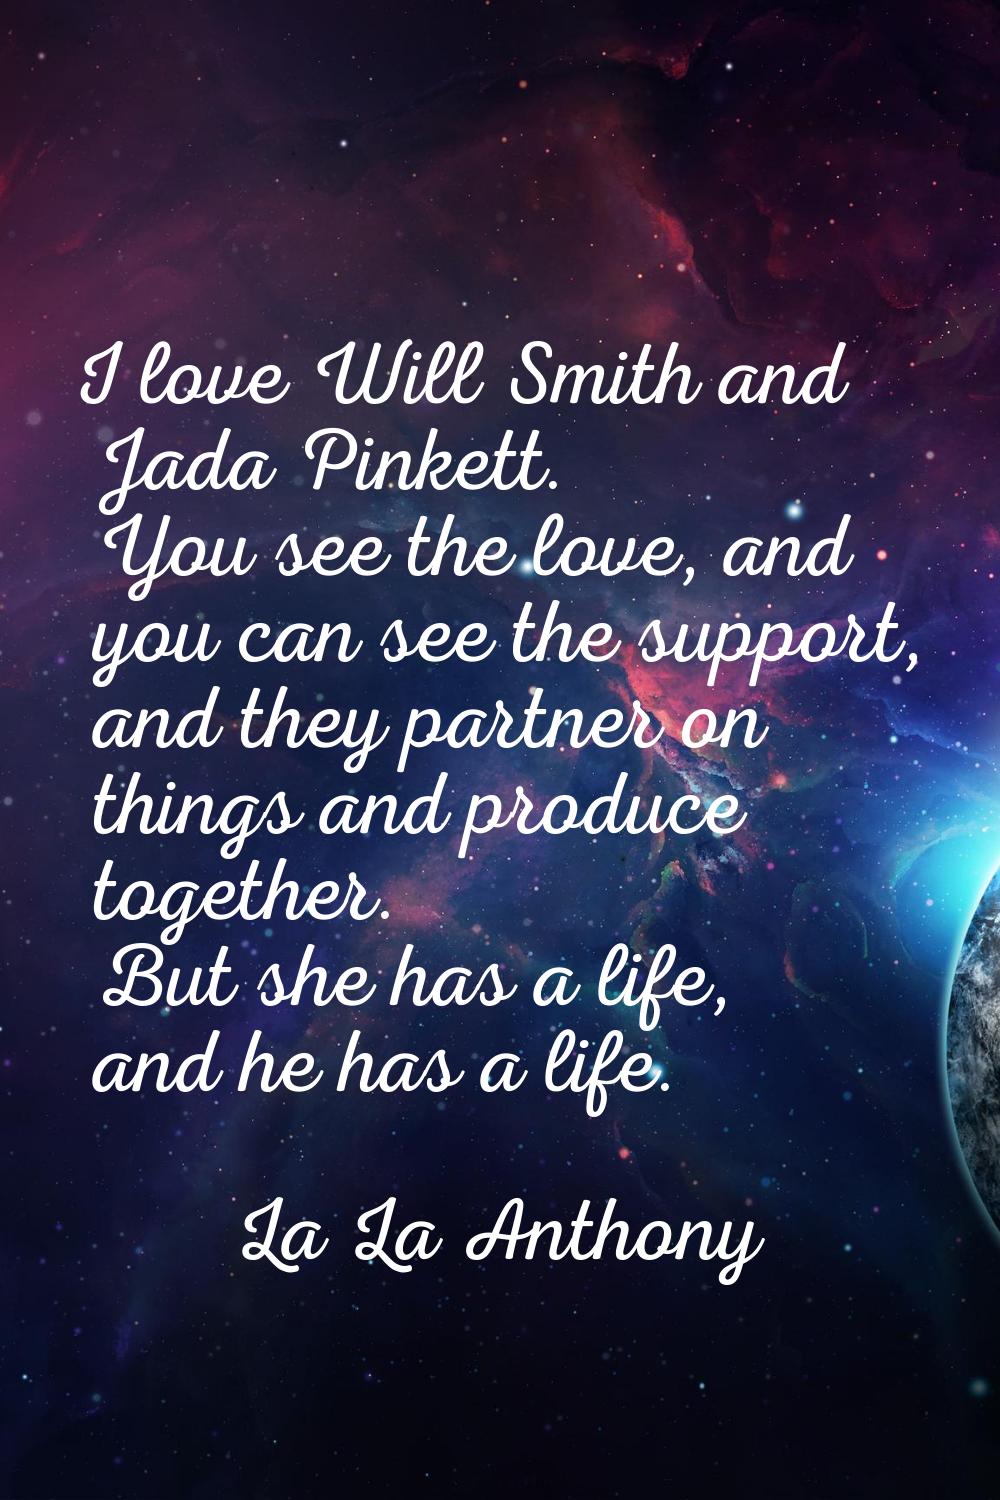 I love Will Smith and Jada Pinkett. You see the love, and you can see the support, and they partner